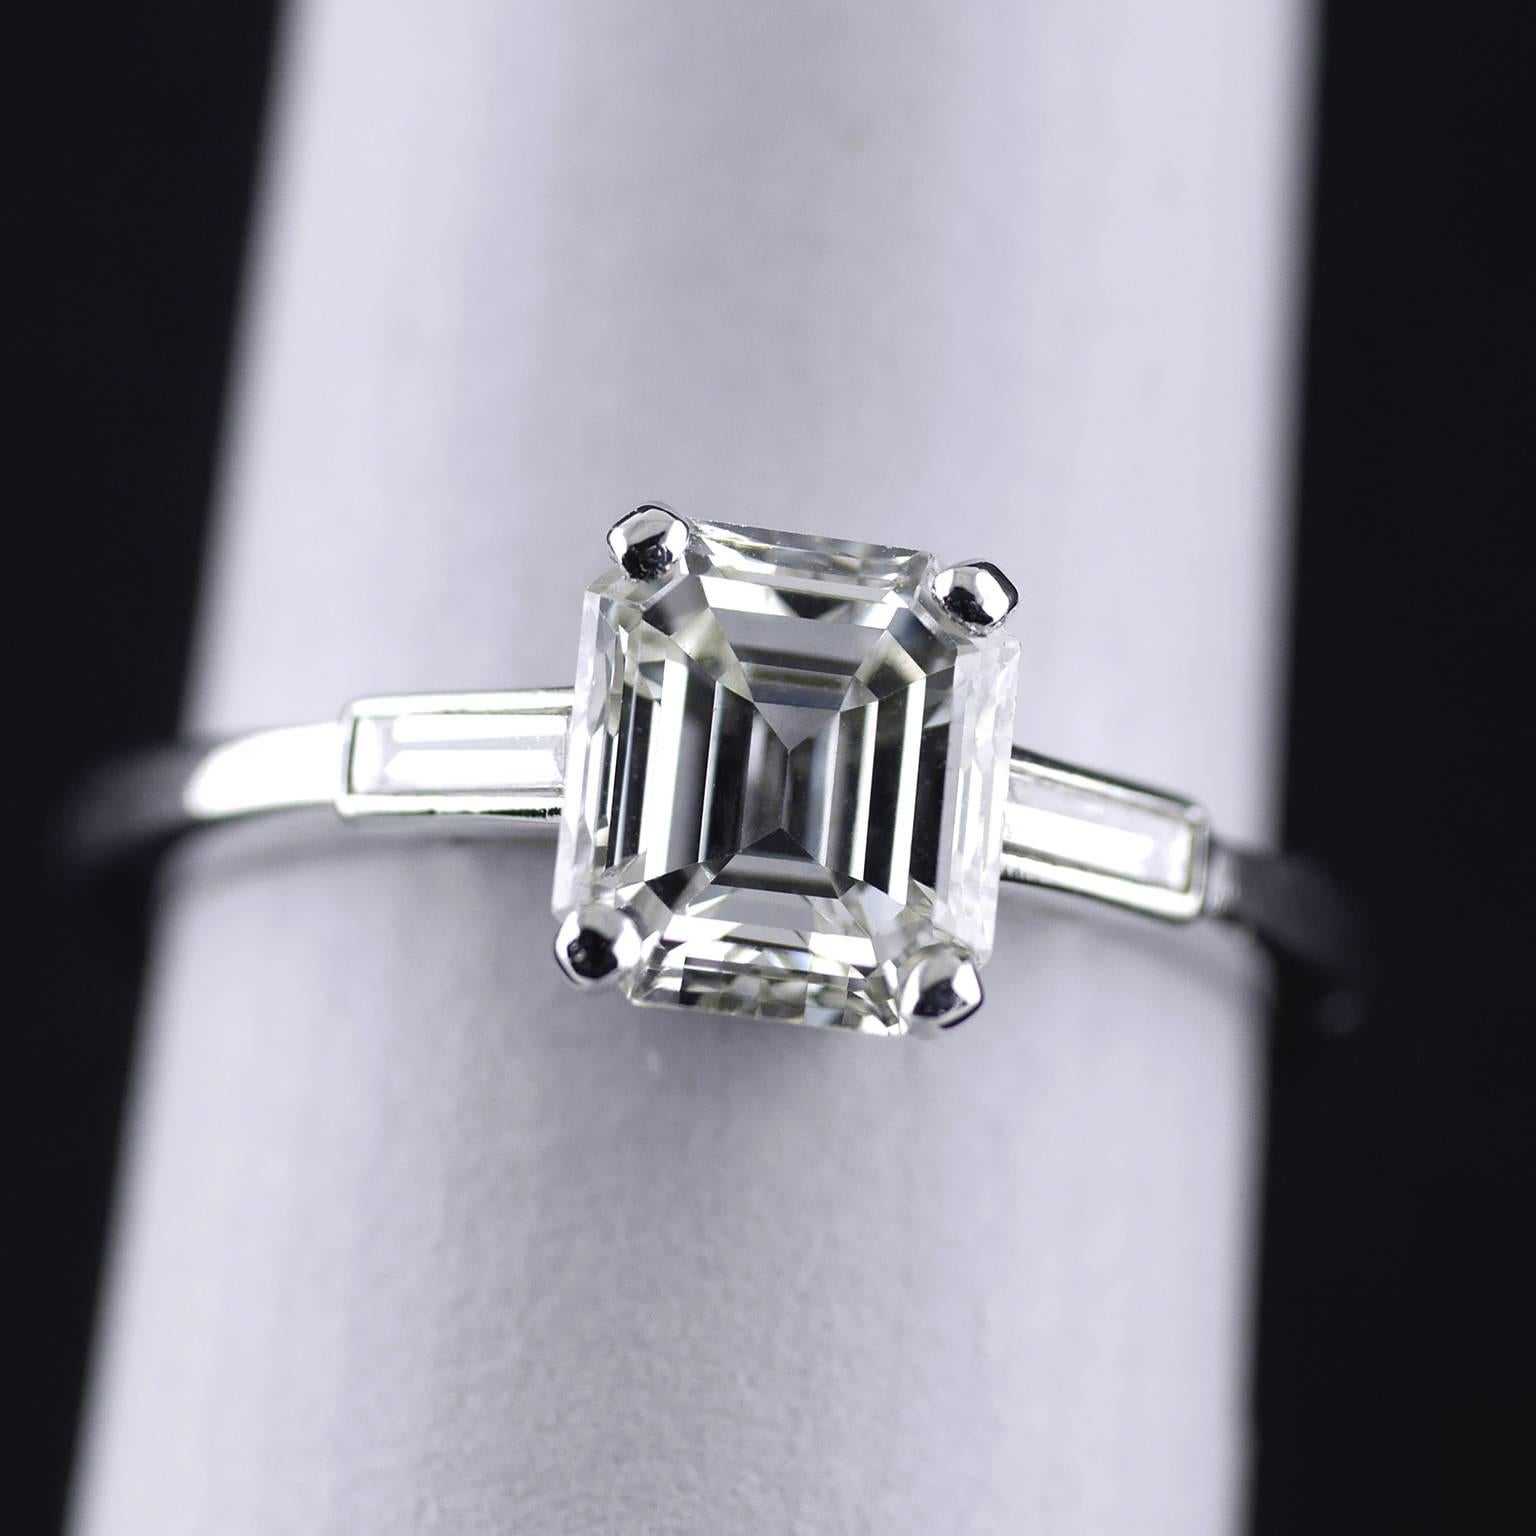 Platinum Art Deco vintage handmade Emerald Cut Diamond ring circa 1930.

1.61ct Emerald cut diamond, H/I, Vs1, set on a Platinum shank. With two baguette diamonds on the shoulders of approx 0.25ct H/I, Vs1 (total weight). British Gemmological